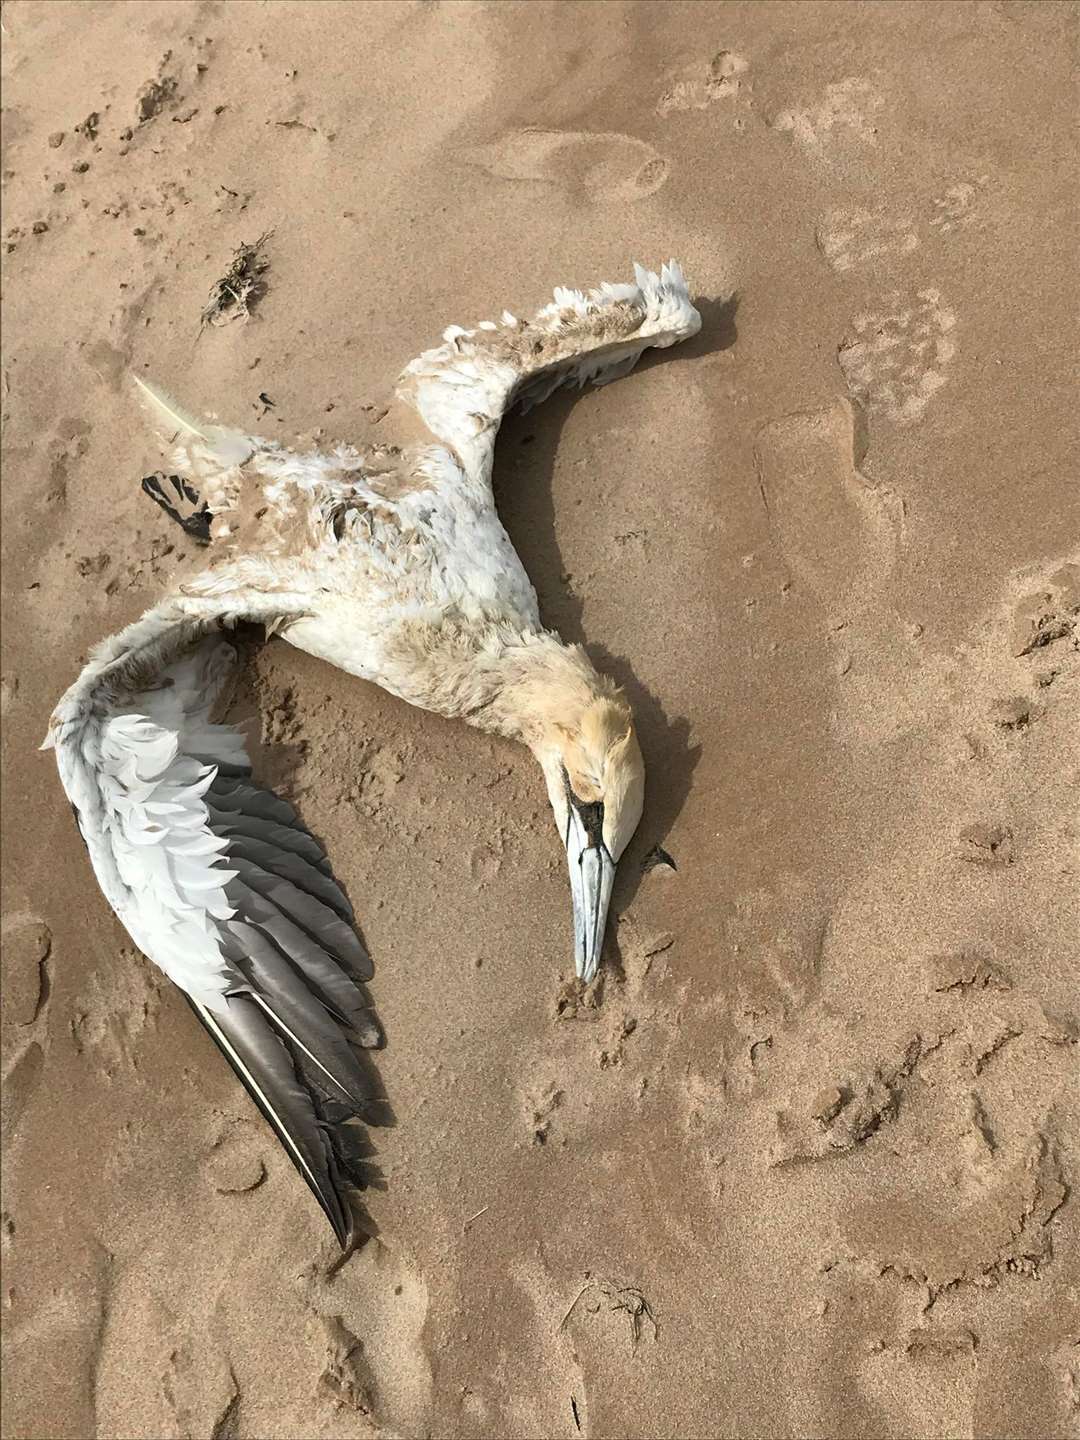 Dead seas birds continuet to be found on Aberdeenshire and Moray coastlines - this Gannet was found at Cullen. Picture: David Porter